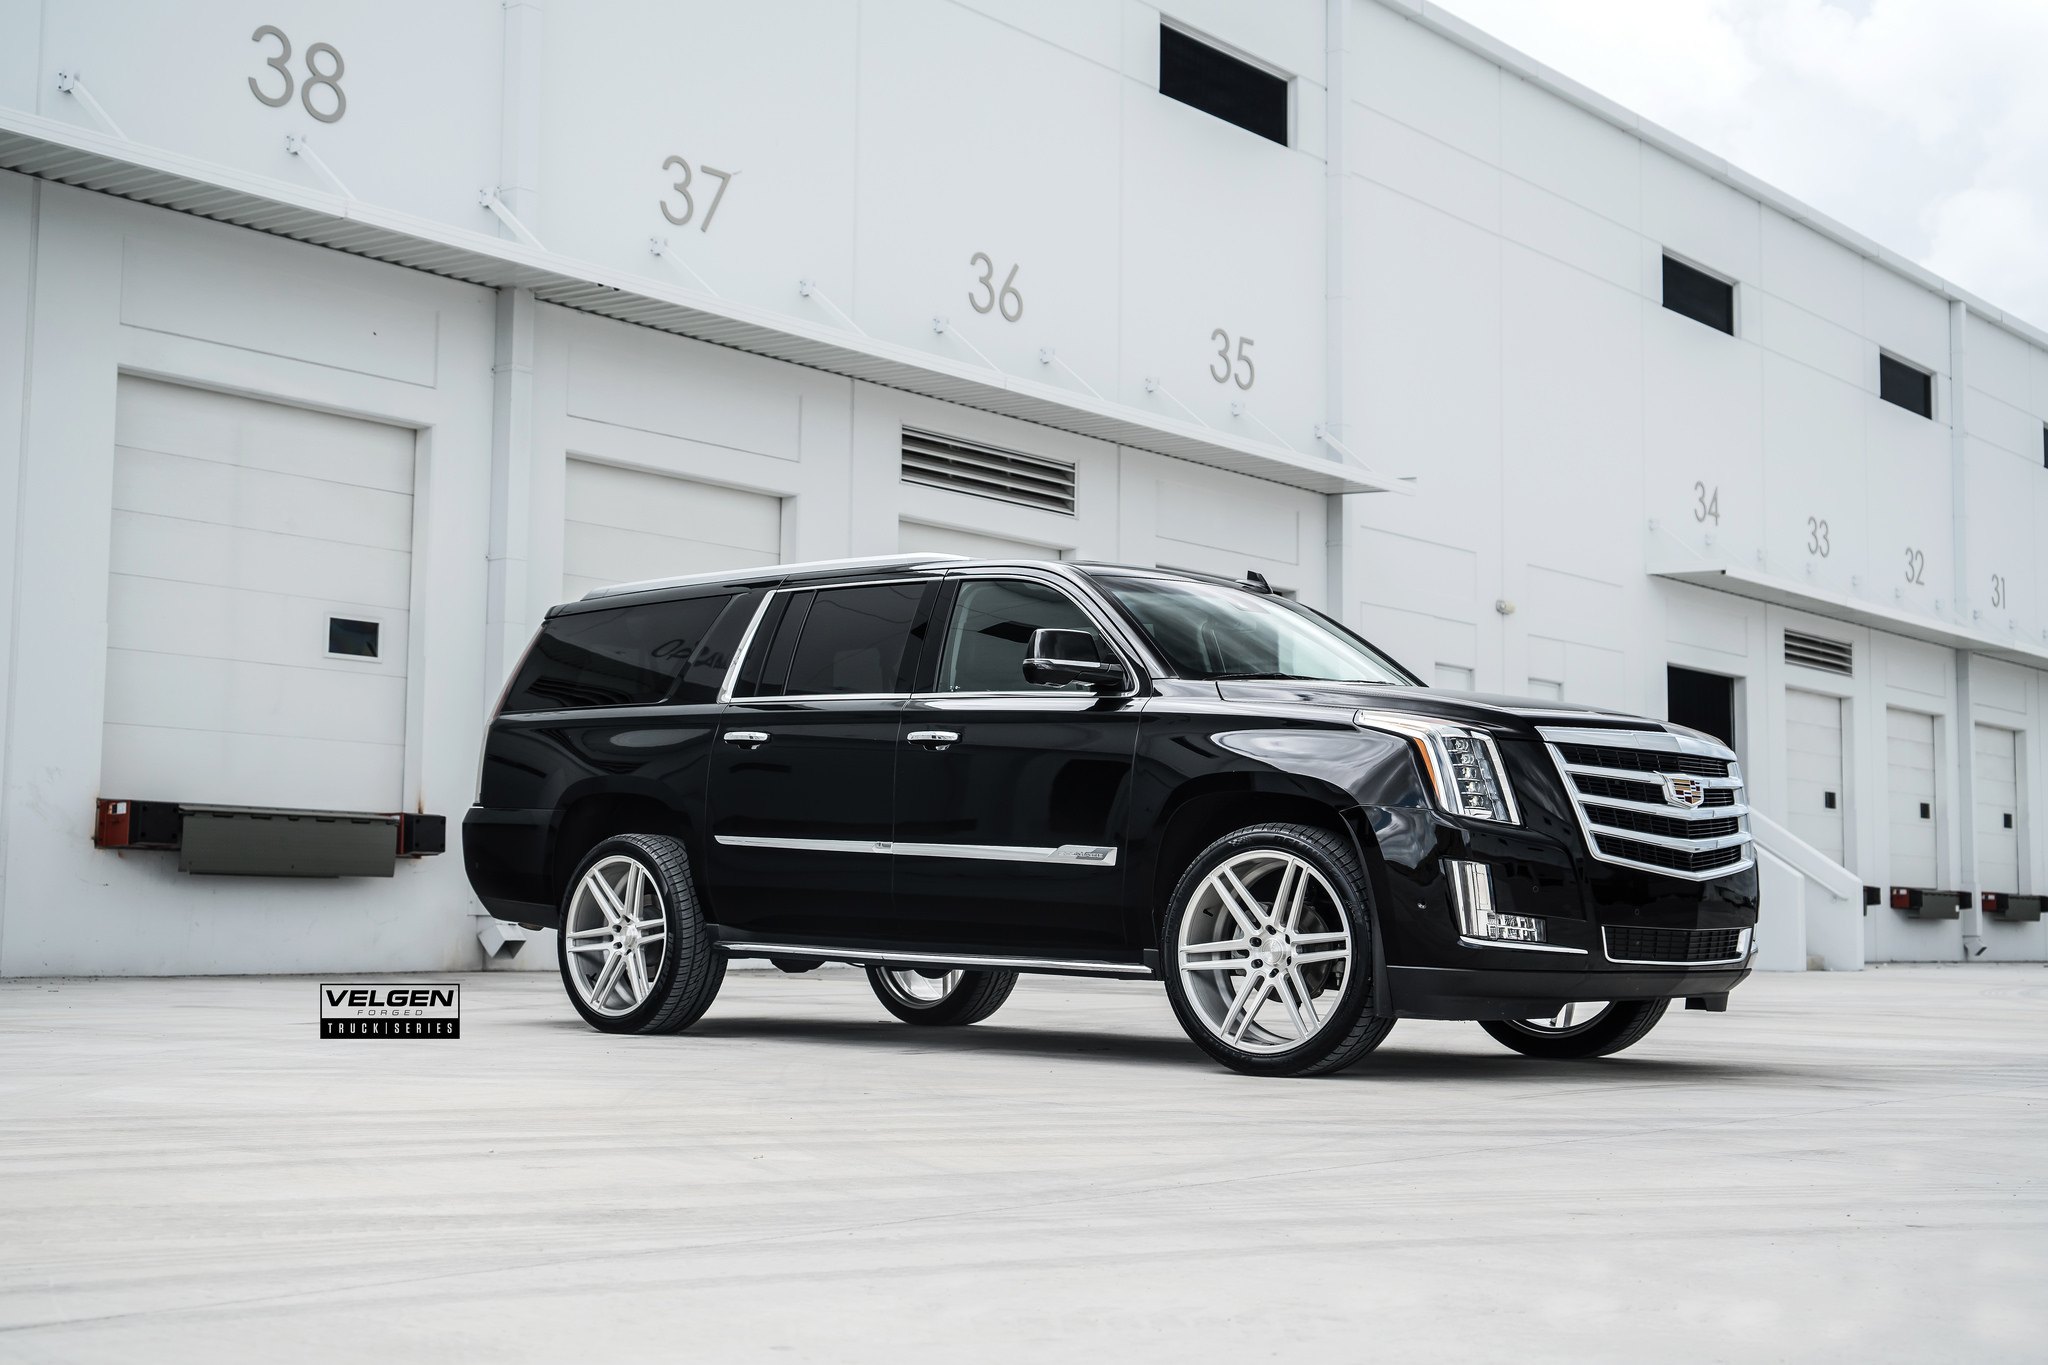 Black Cadillac Escalade with Aftermarket LED Headlights - Photo by Velgen